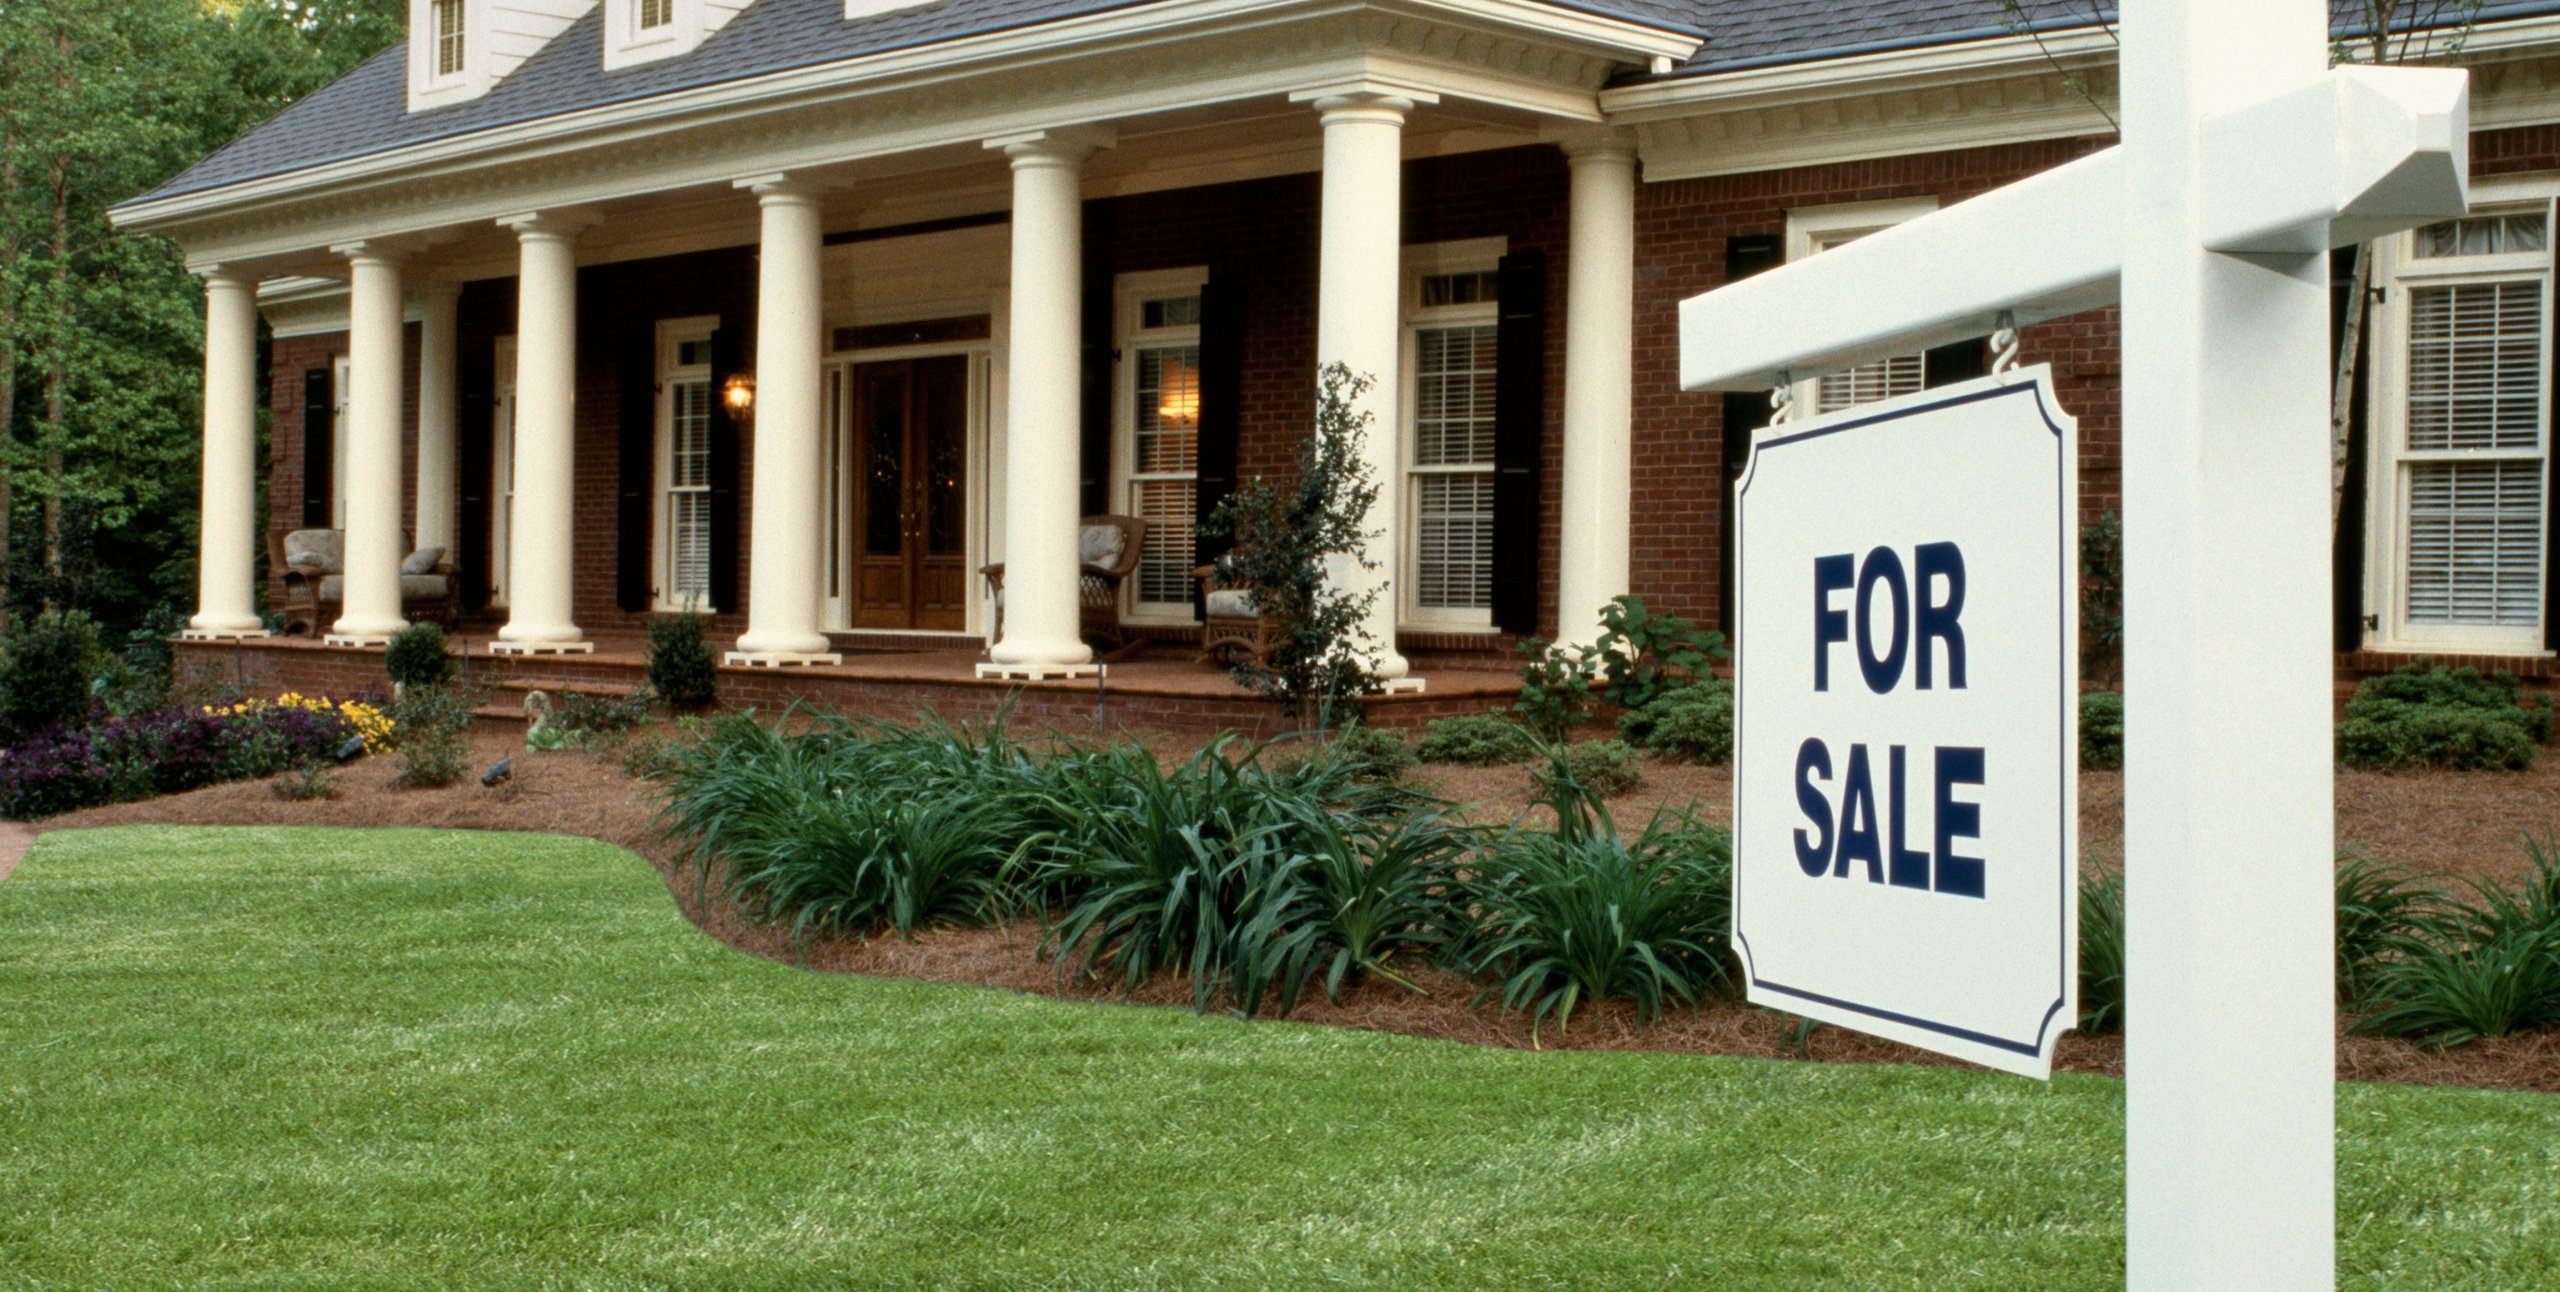 for sale sign in front of brick house